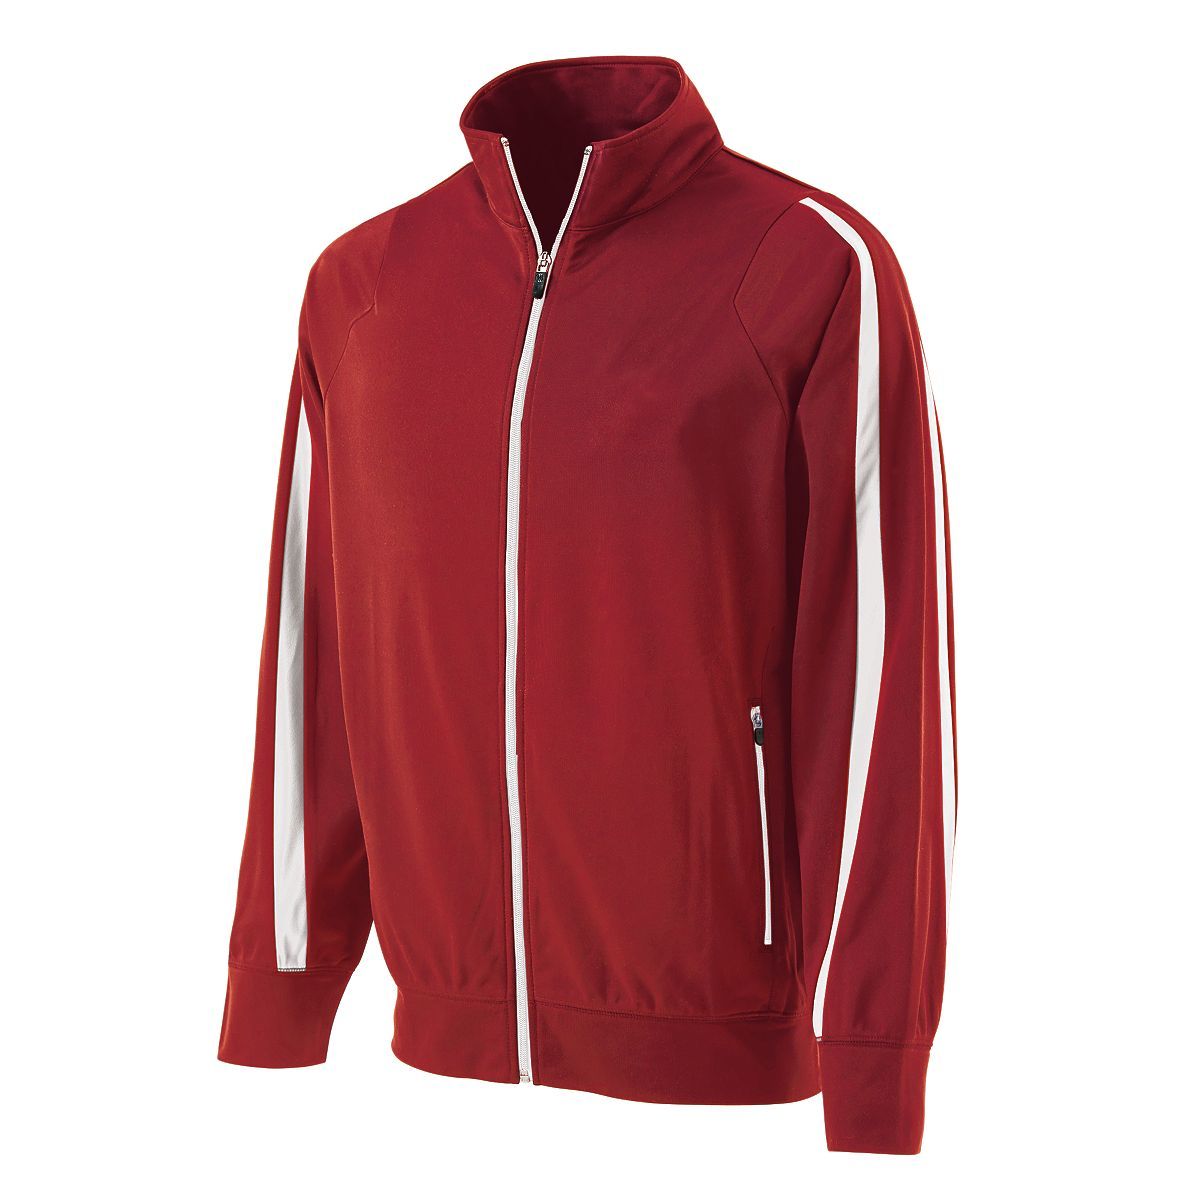 Holloway Determination Jacket in Scarlet/White  -Part of the Adult, Adult-Jacket, Holloway, Outerwear product lines at KanaleyCreations.com